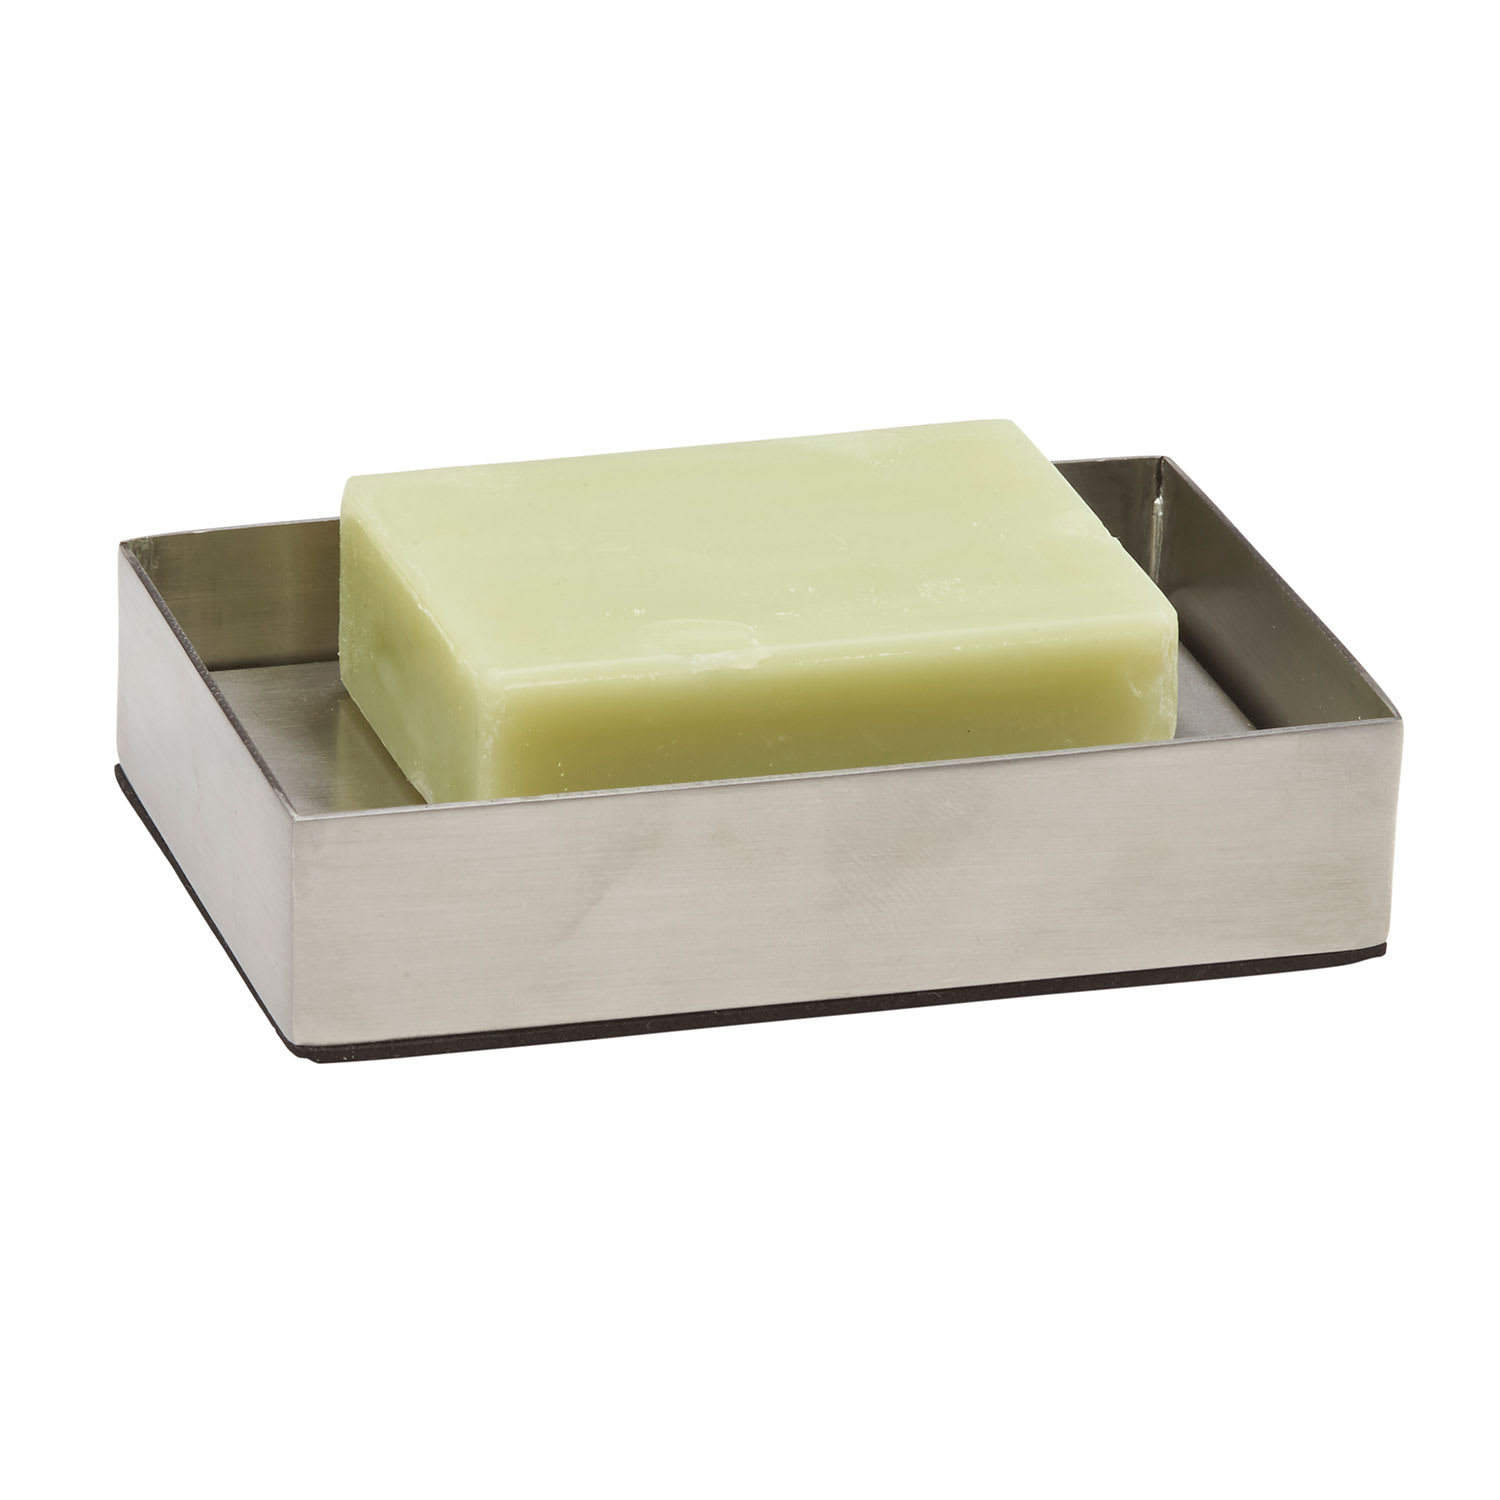 Stainless Steel Cubed Bath Soap Dish